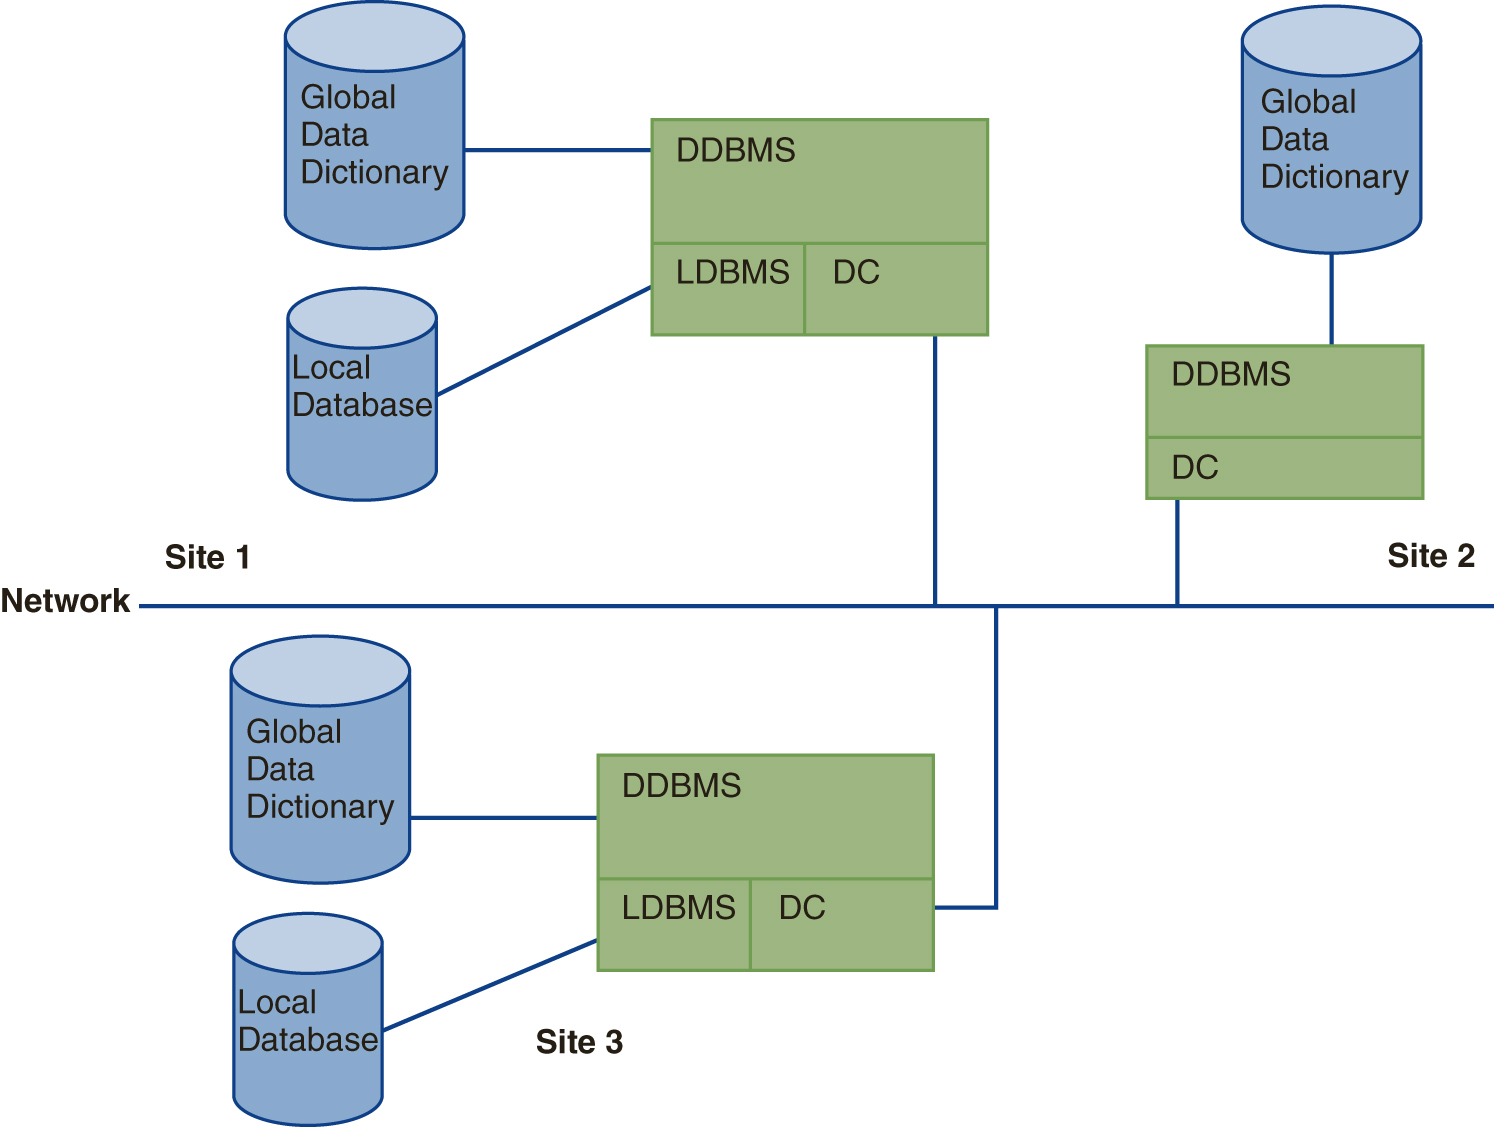 An illustration of the components of a Distributed Database system.
The network consists of three sites 1, 2, and 3. Sites 1 and 3 are connected to D D B S, L D B M S, and D C. D D B M S is connected to the global data dictionary. L D B M S is connected to the local database. Site 2 is connected to D D B M S and D C. D D B M S is connected to the global data dictionary.
